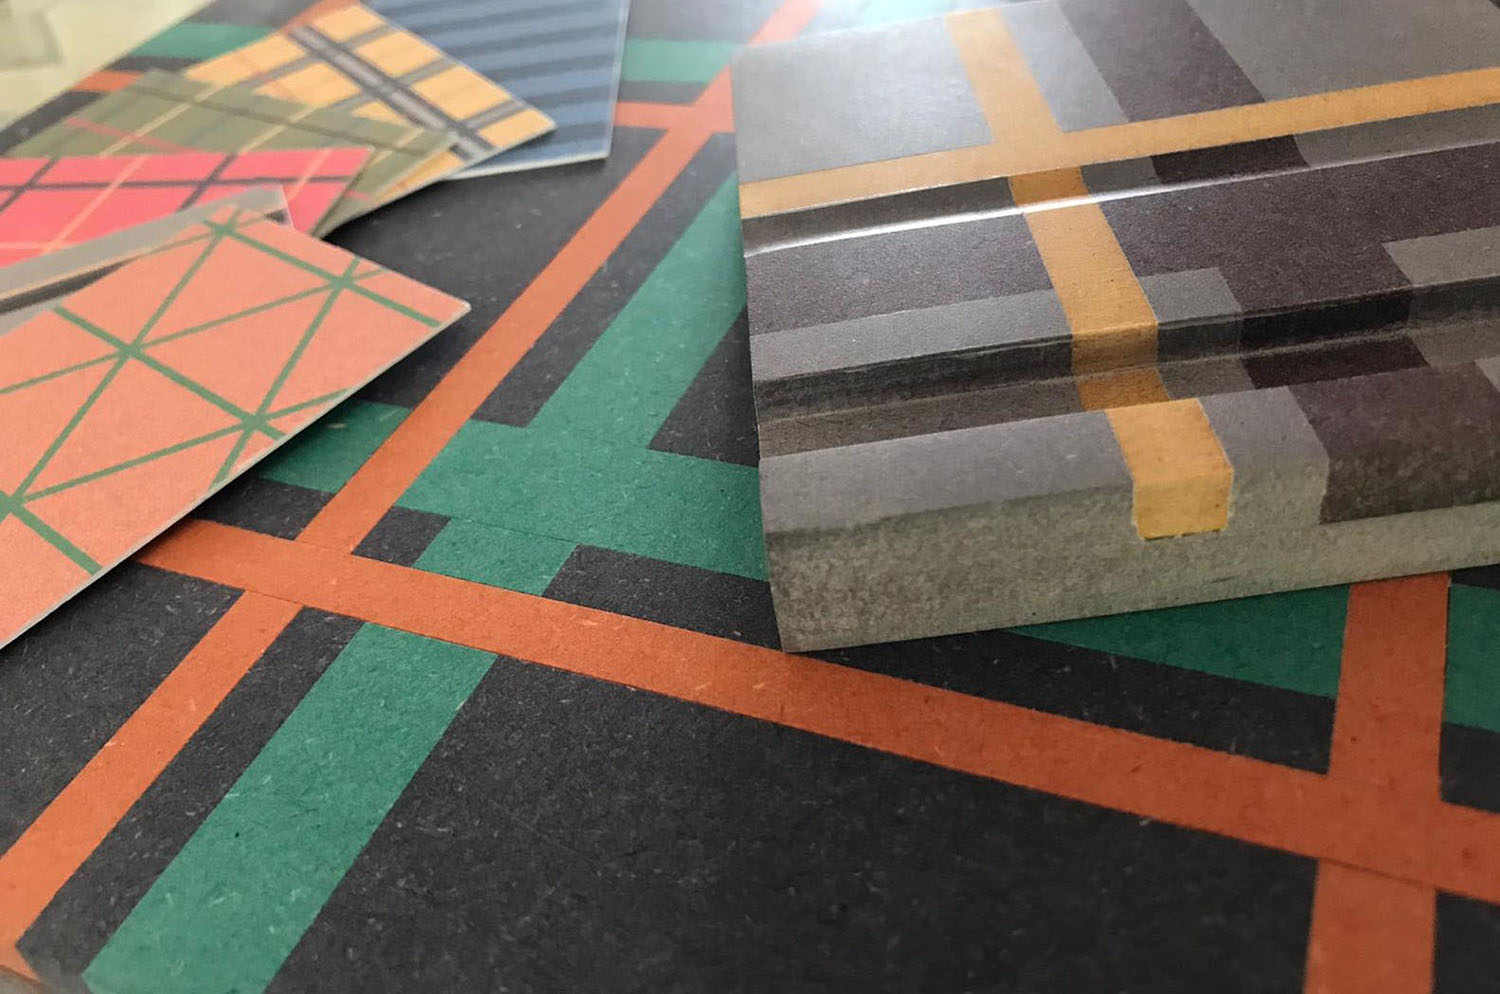 Precision CNCd Valchromat in Parquet style